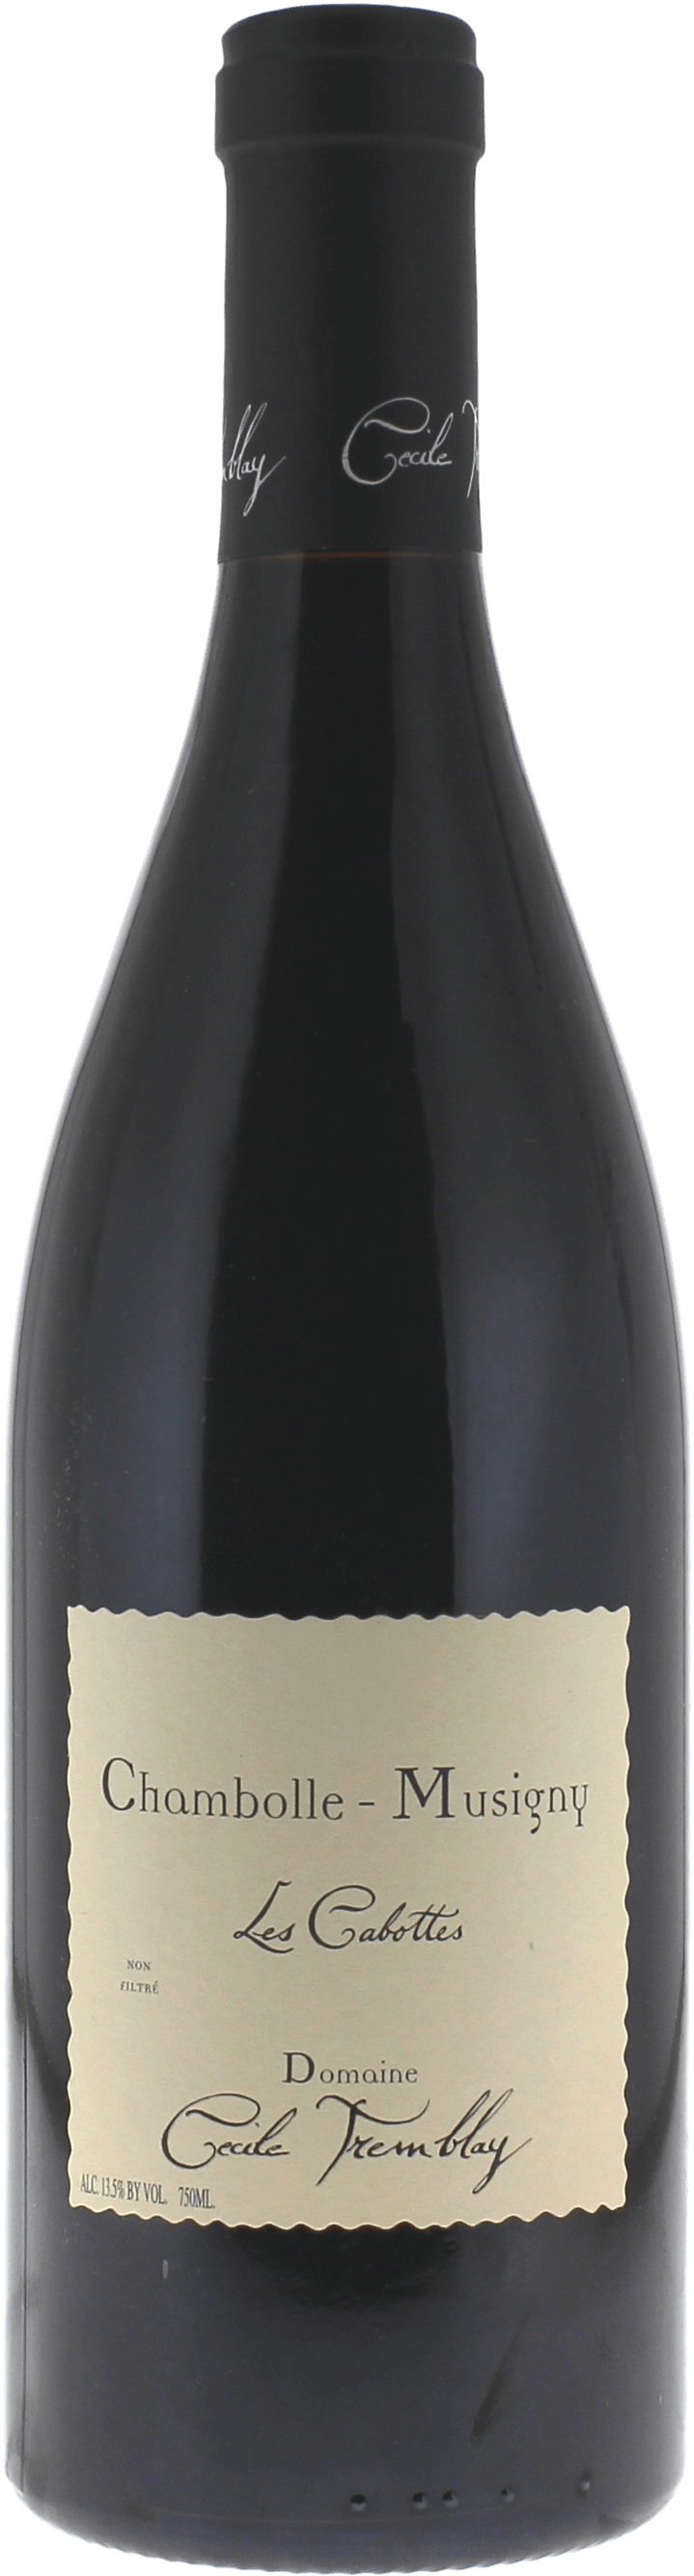 Chambolle musigny les cabottes 2015 Domaine TREMBLAY Cecile, Bourgogne rouge